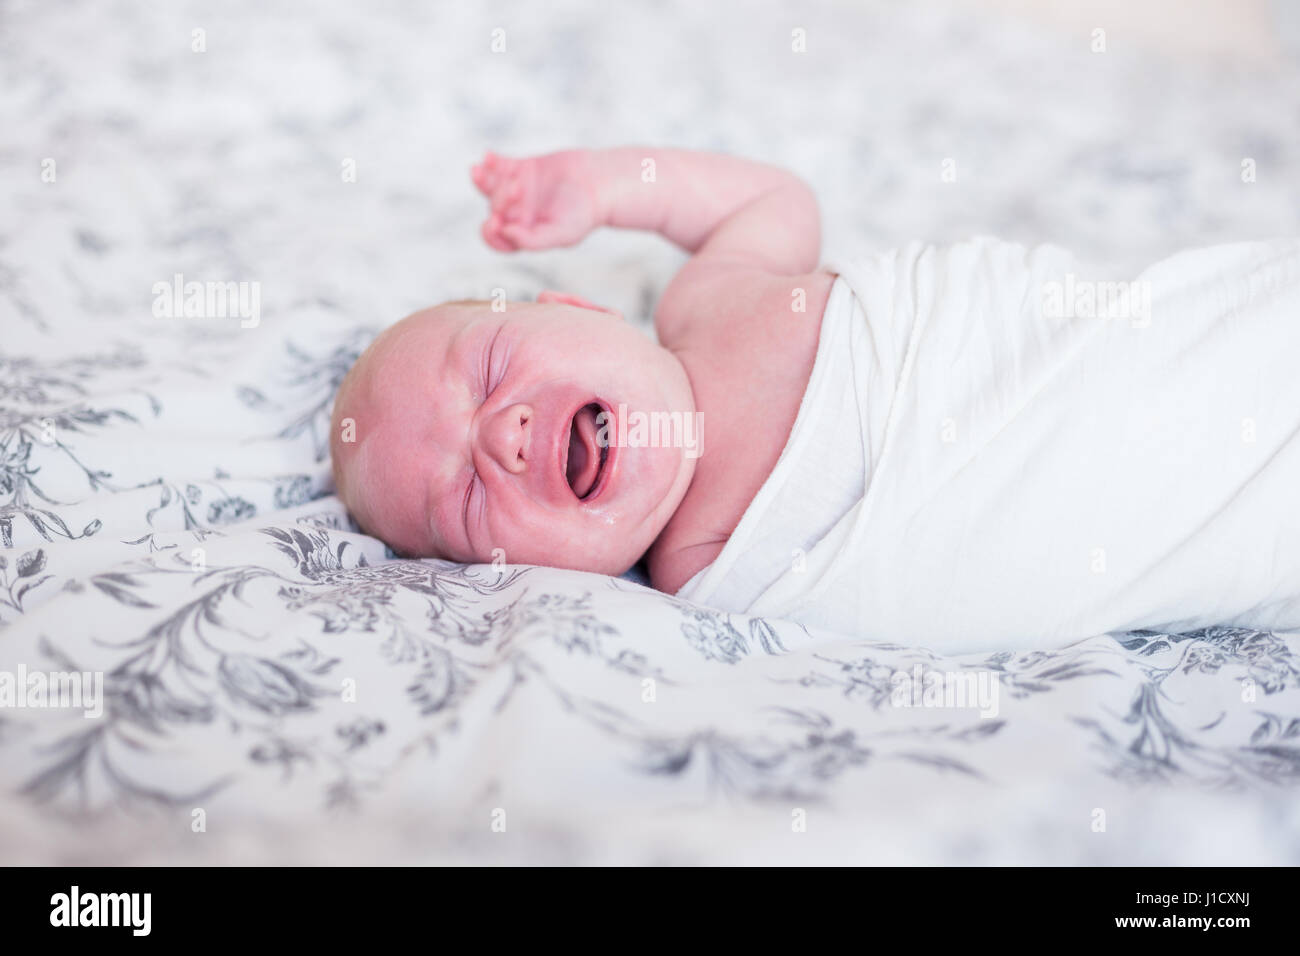 Newborn baby crying in bed. Natural light, shallow depth of field, copy space. Stock Photo